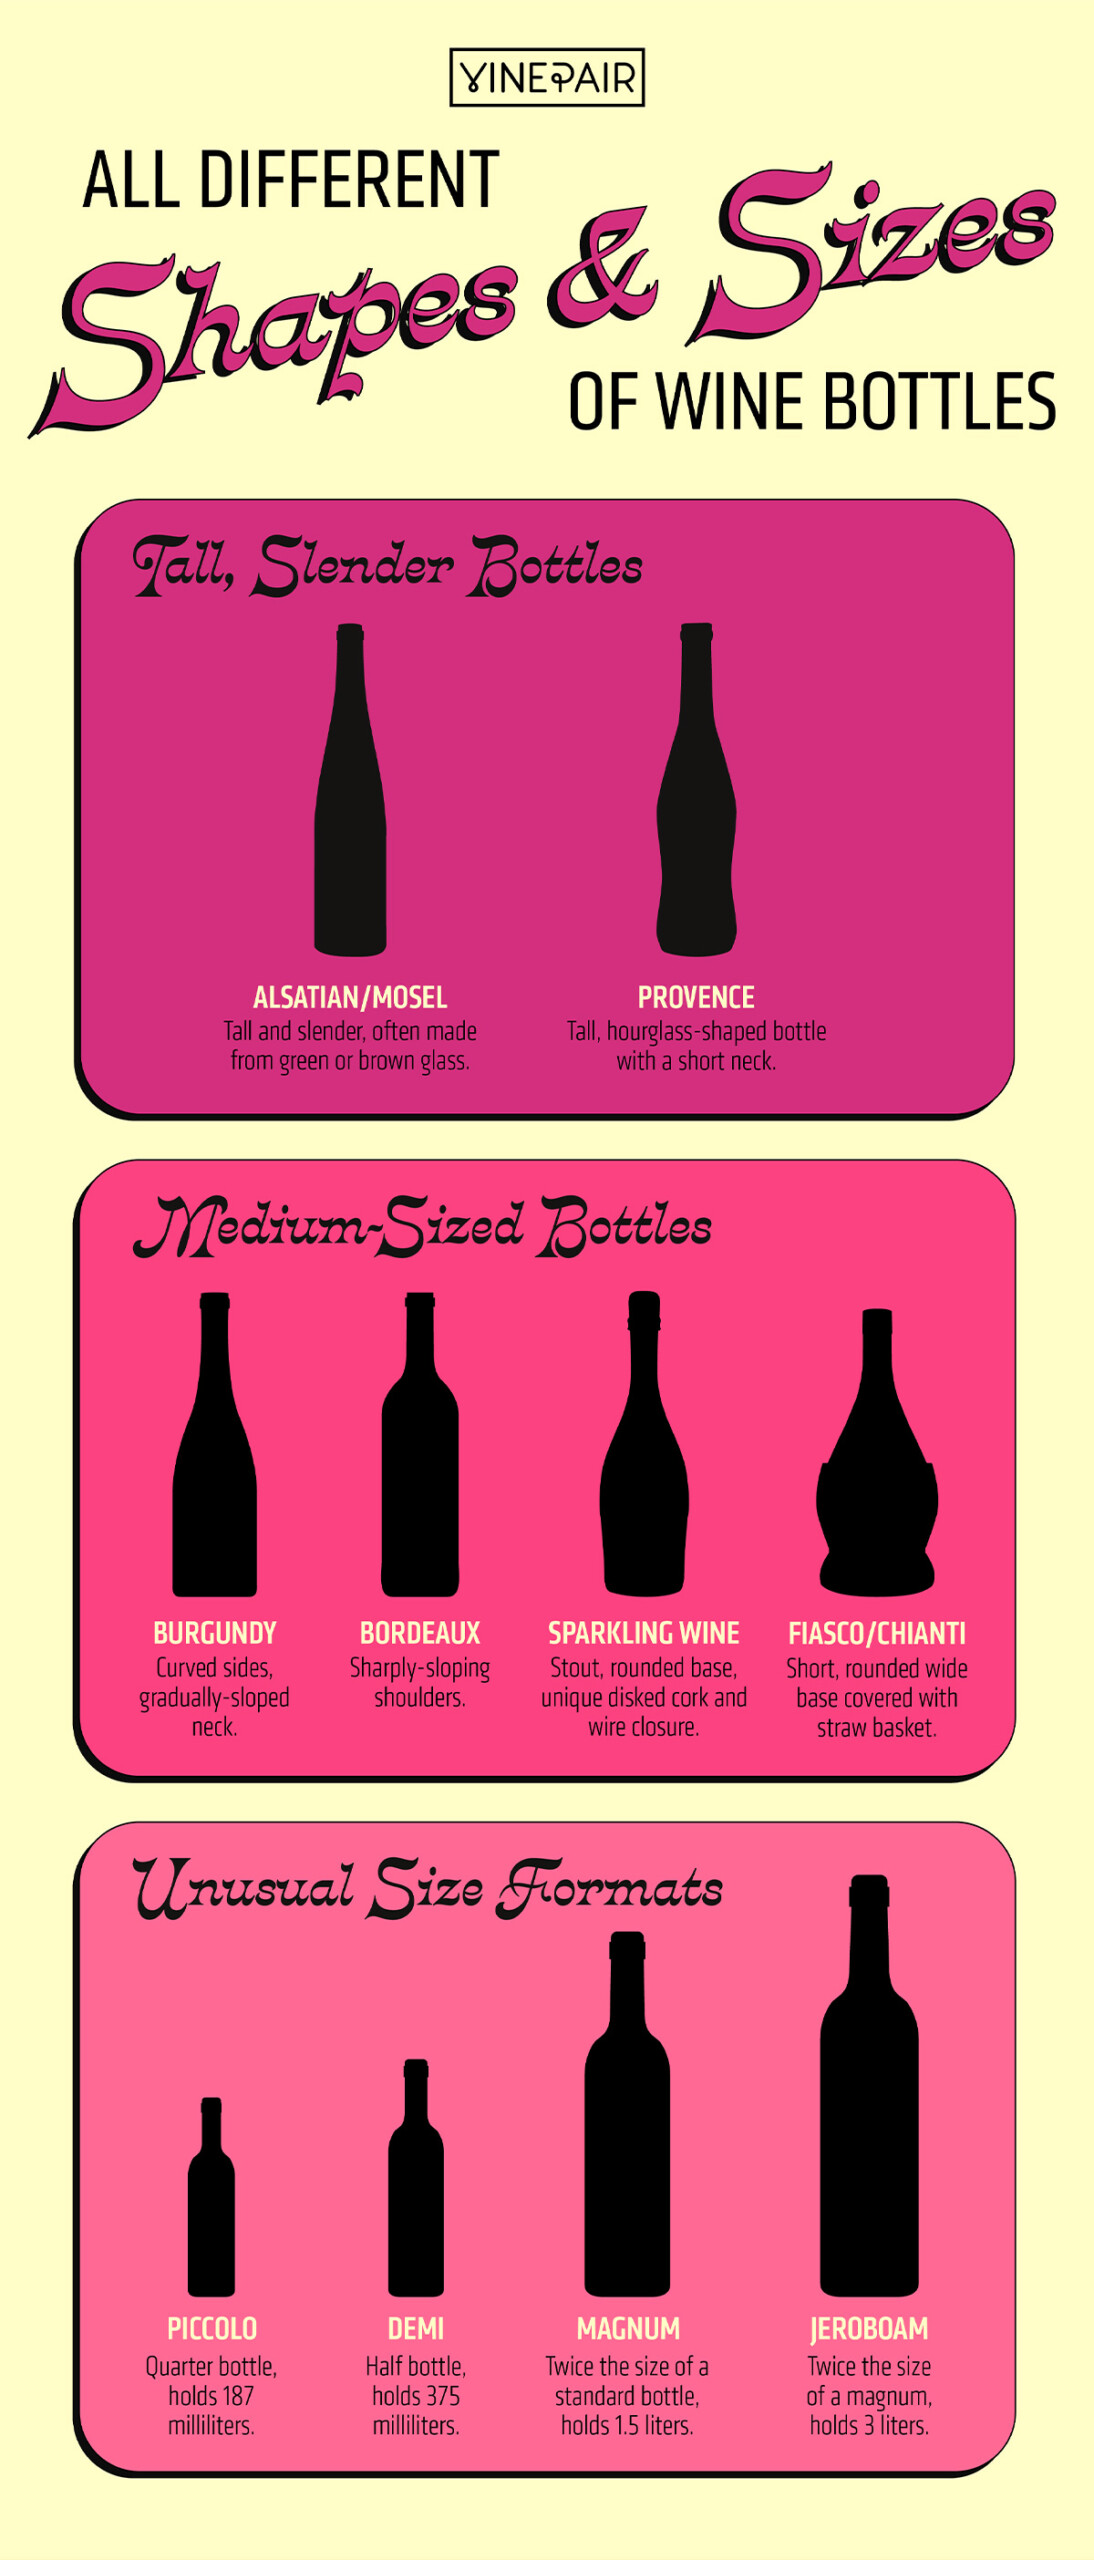 A Visual Guide to All the Different Shapes and Sizes of Wine